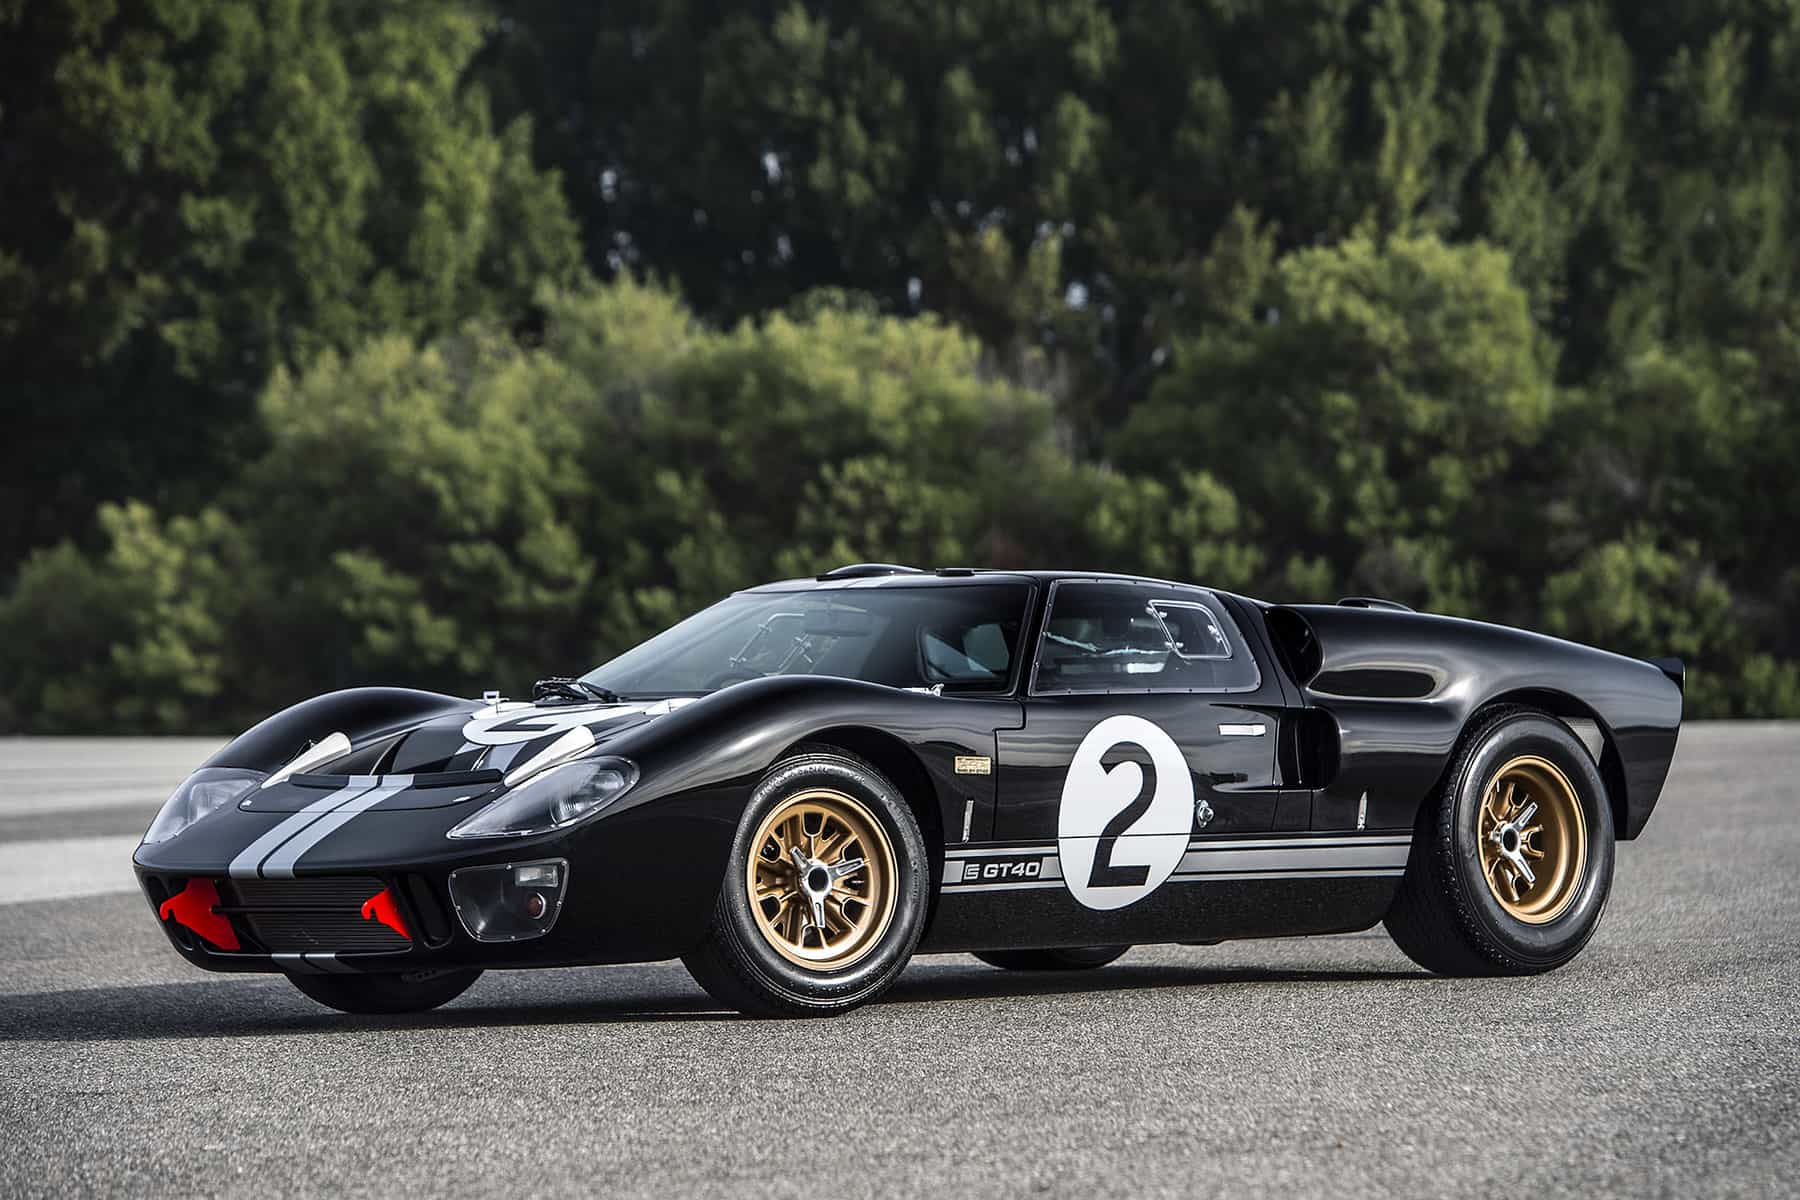 Ford-GT40-MKII-50th-Anniversary-Edition-07